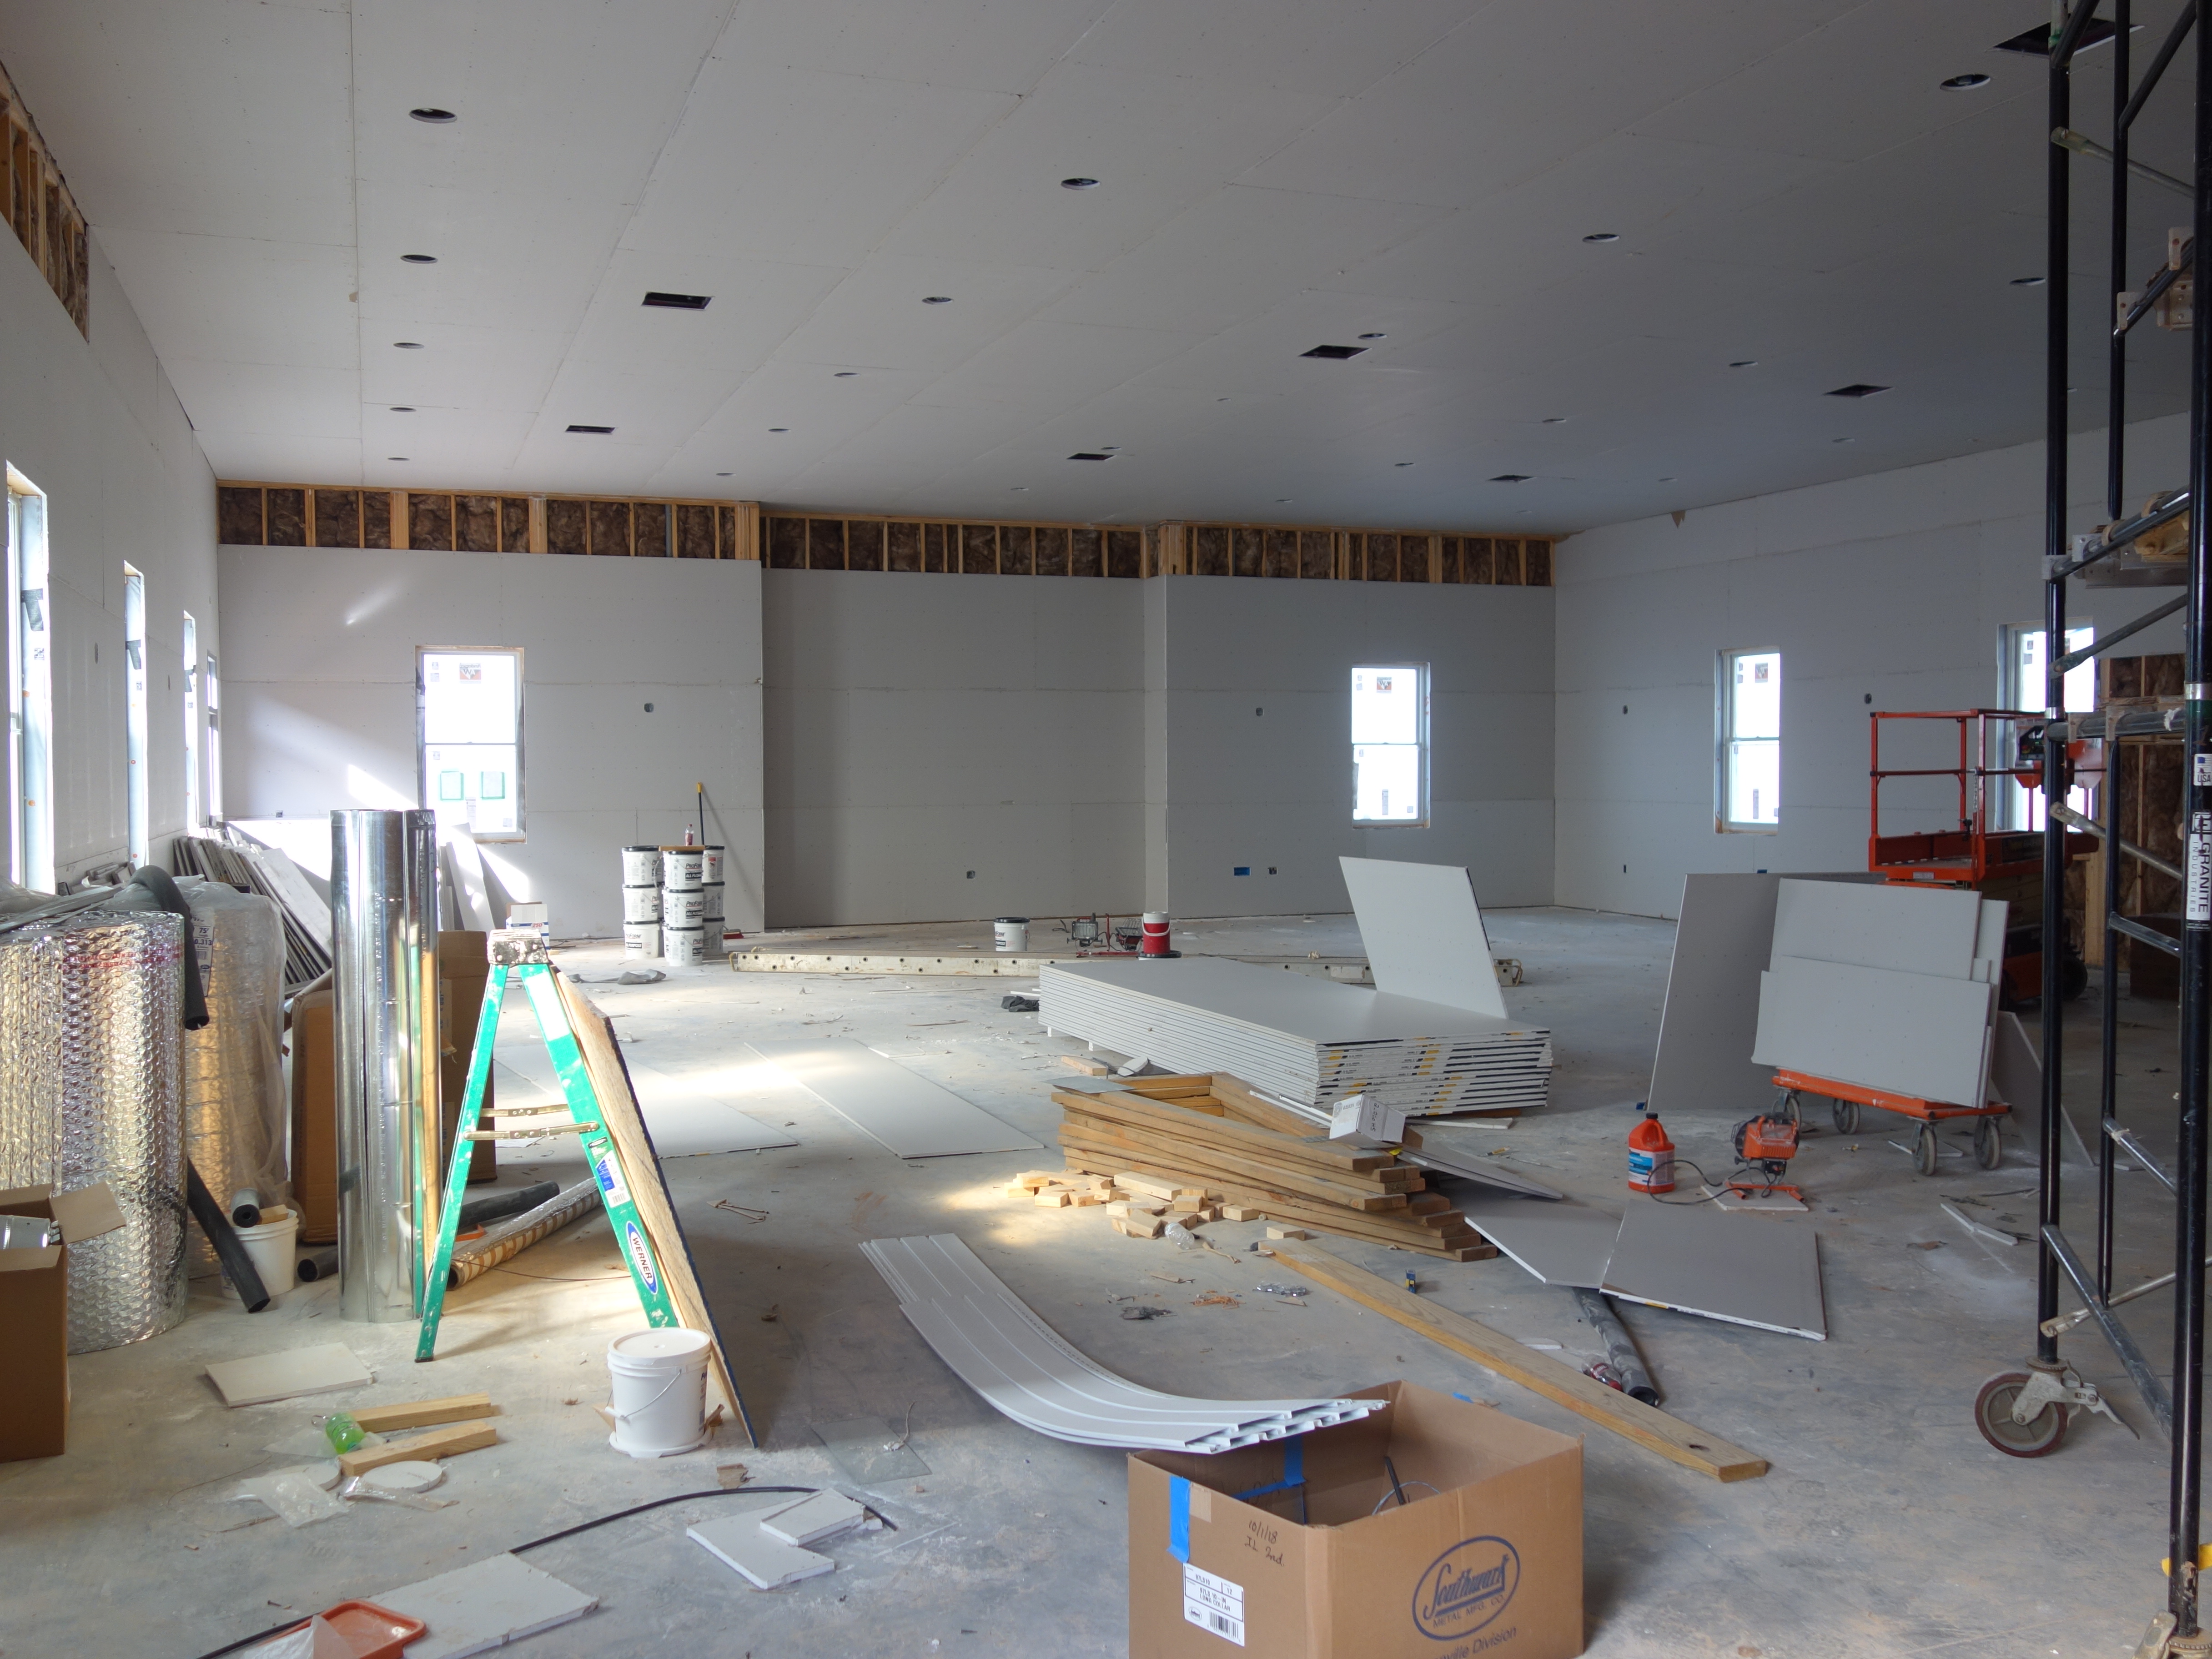 Unfinished interior construction of fellowship hall